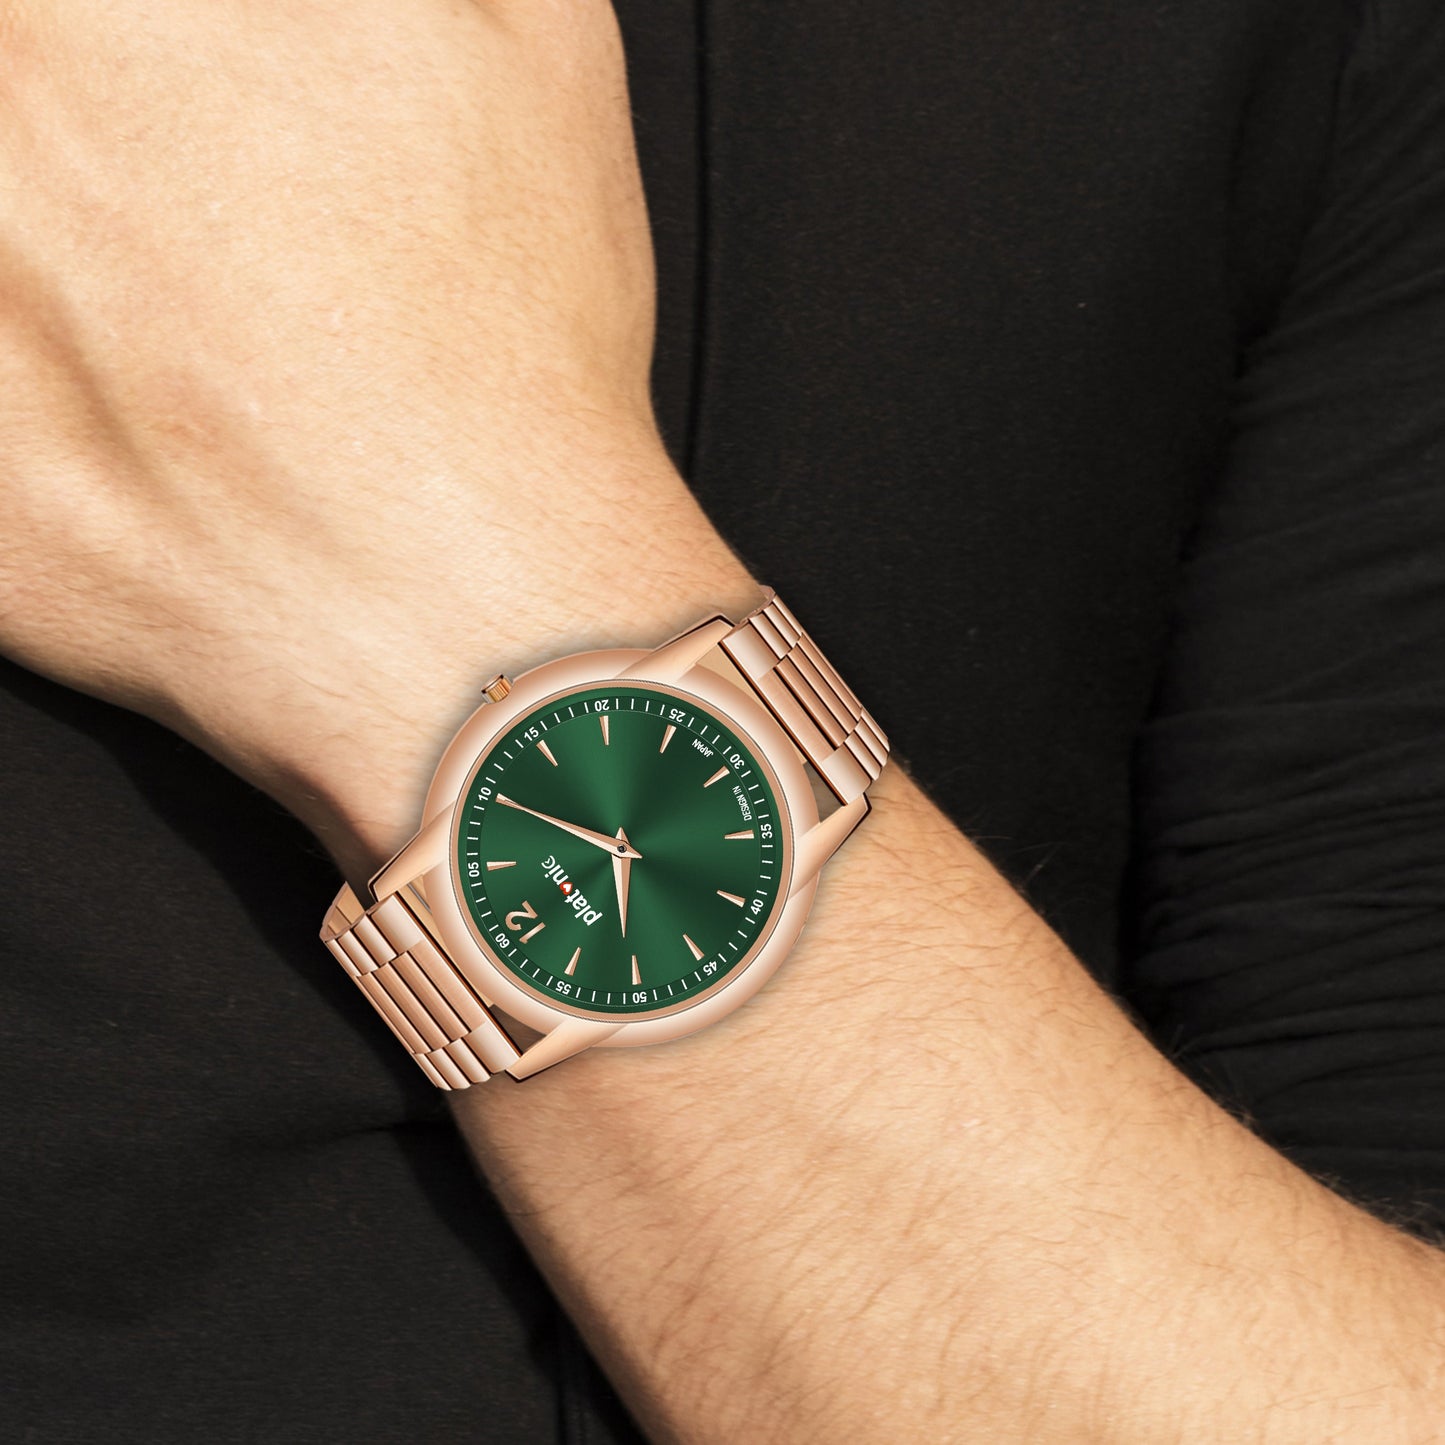 Platonic India's First Slimmest Timepiece Green